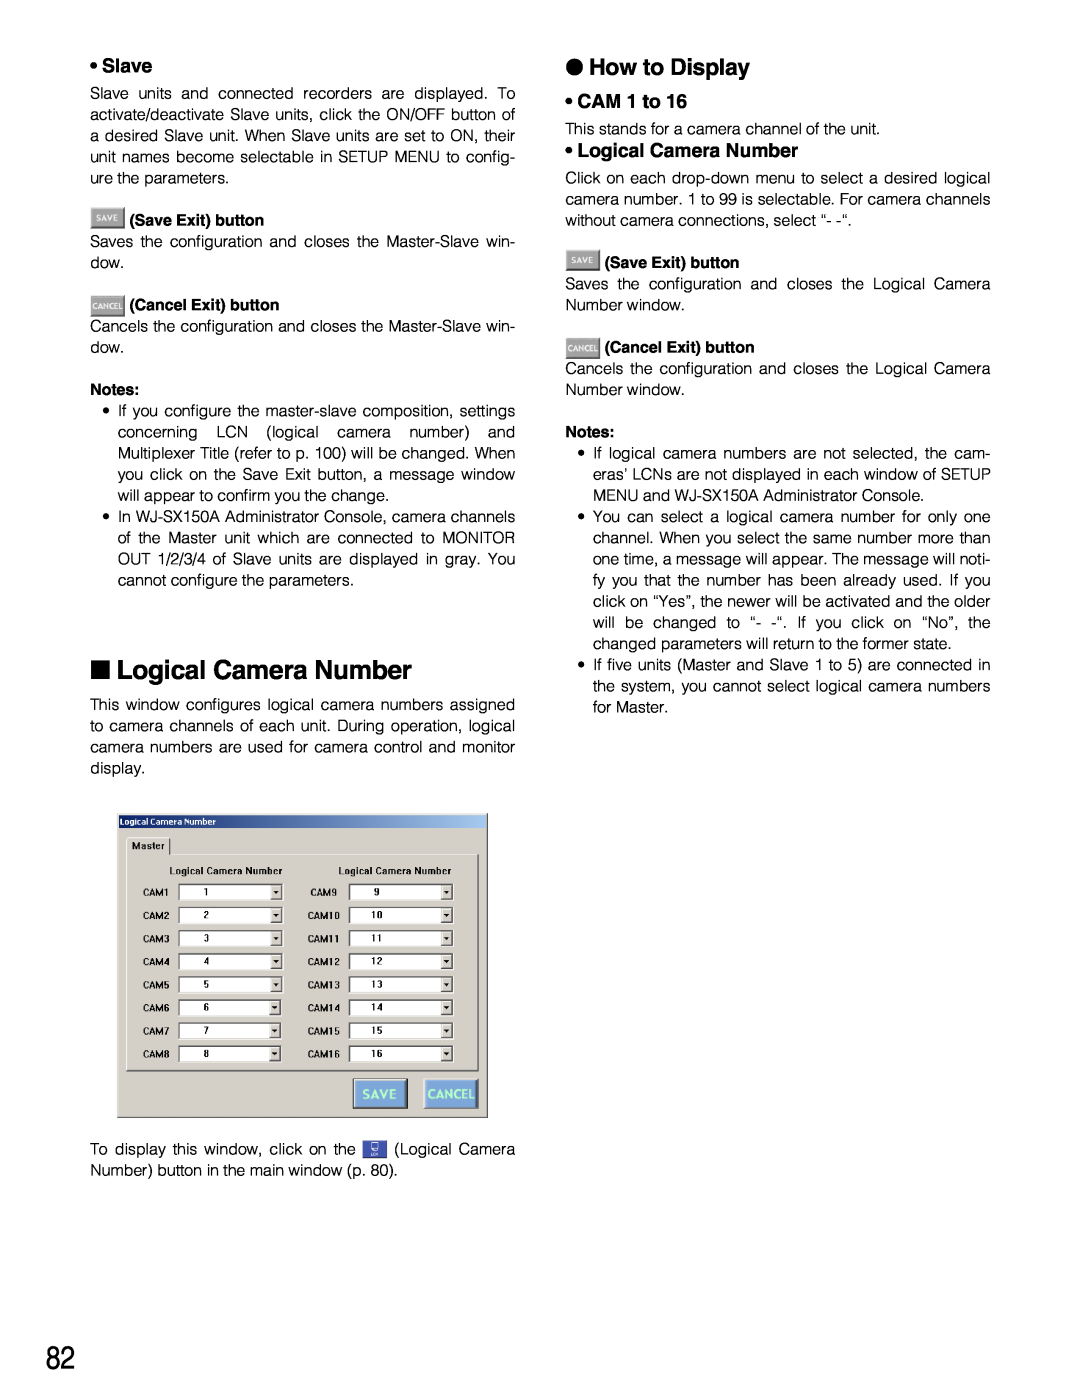 Panasonic WJ-SX150A manual Logical Camera Number, Slave, CAM 1 to, How to Display, Save Exit button, Cancel Exit button 